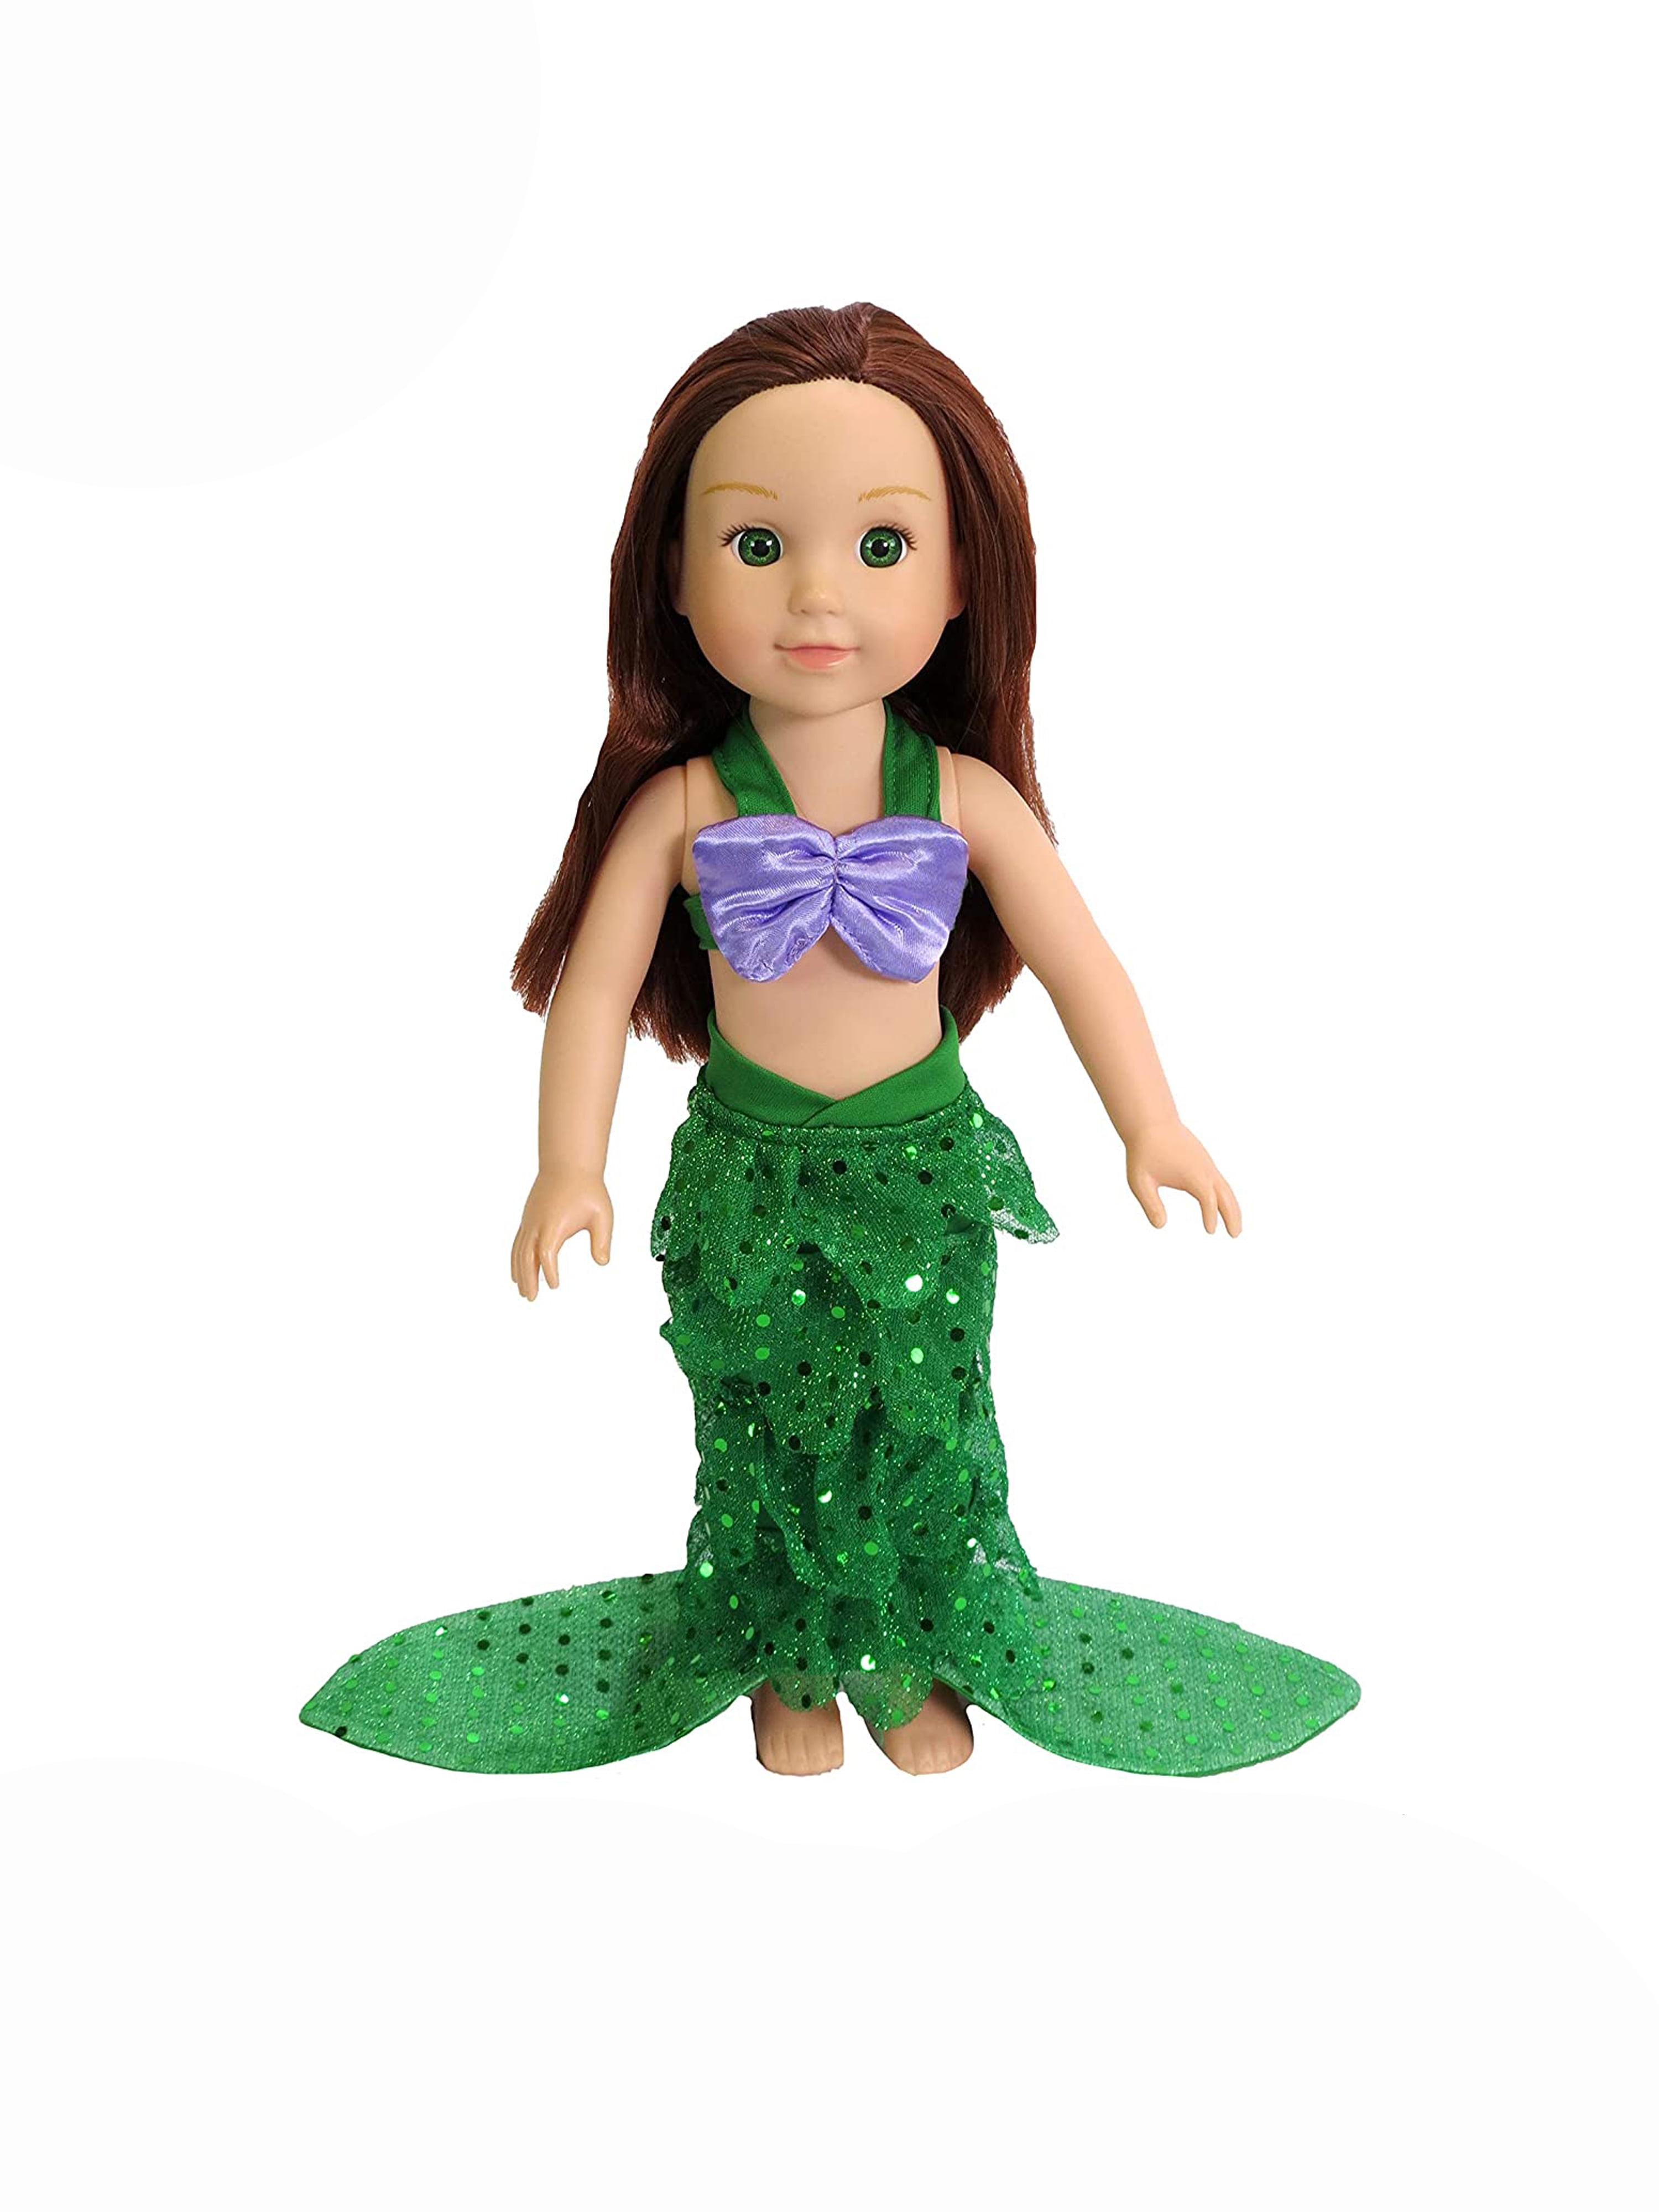 Mermaid Outfit Costume for 14 in Wellie Wishers American Girl Doll Clothes